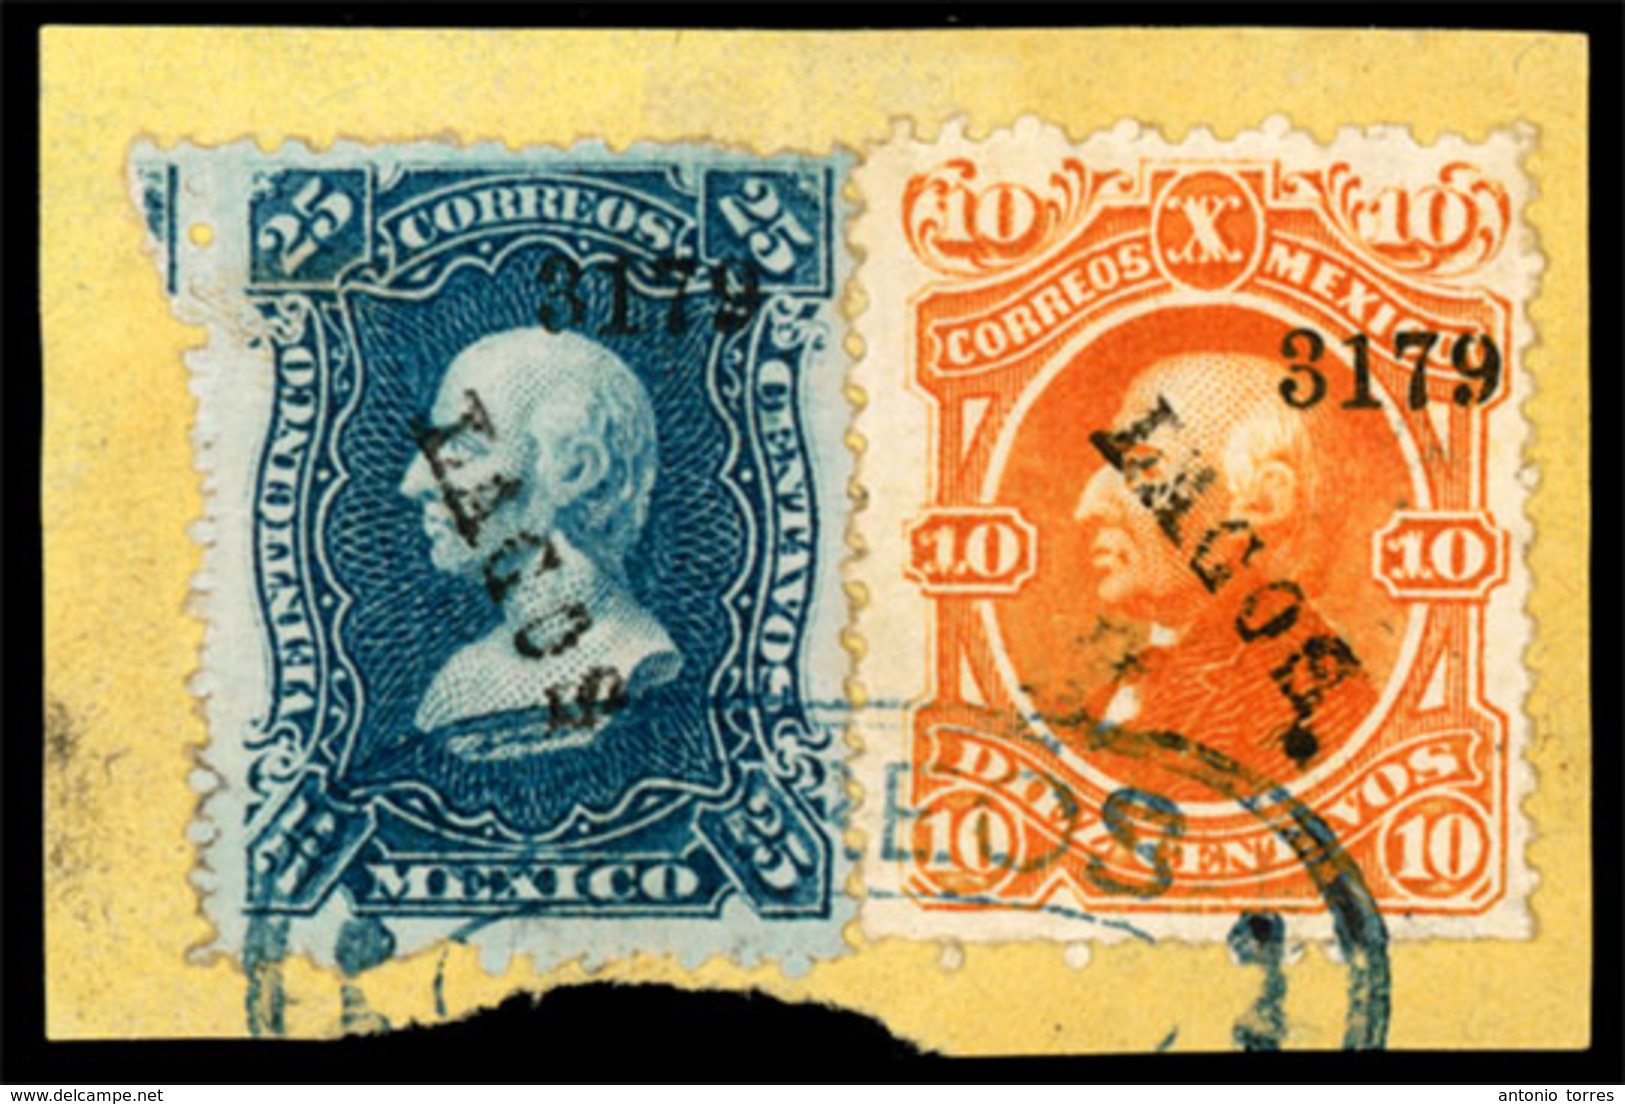 MEXICO. Lagos District. V.f.piece. Scott # NF 110,111.Condition: Used/VF. - Messico